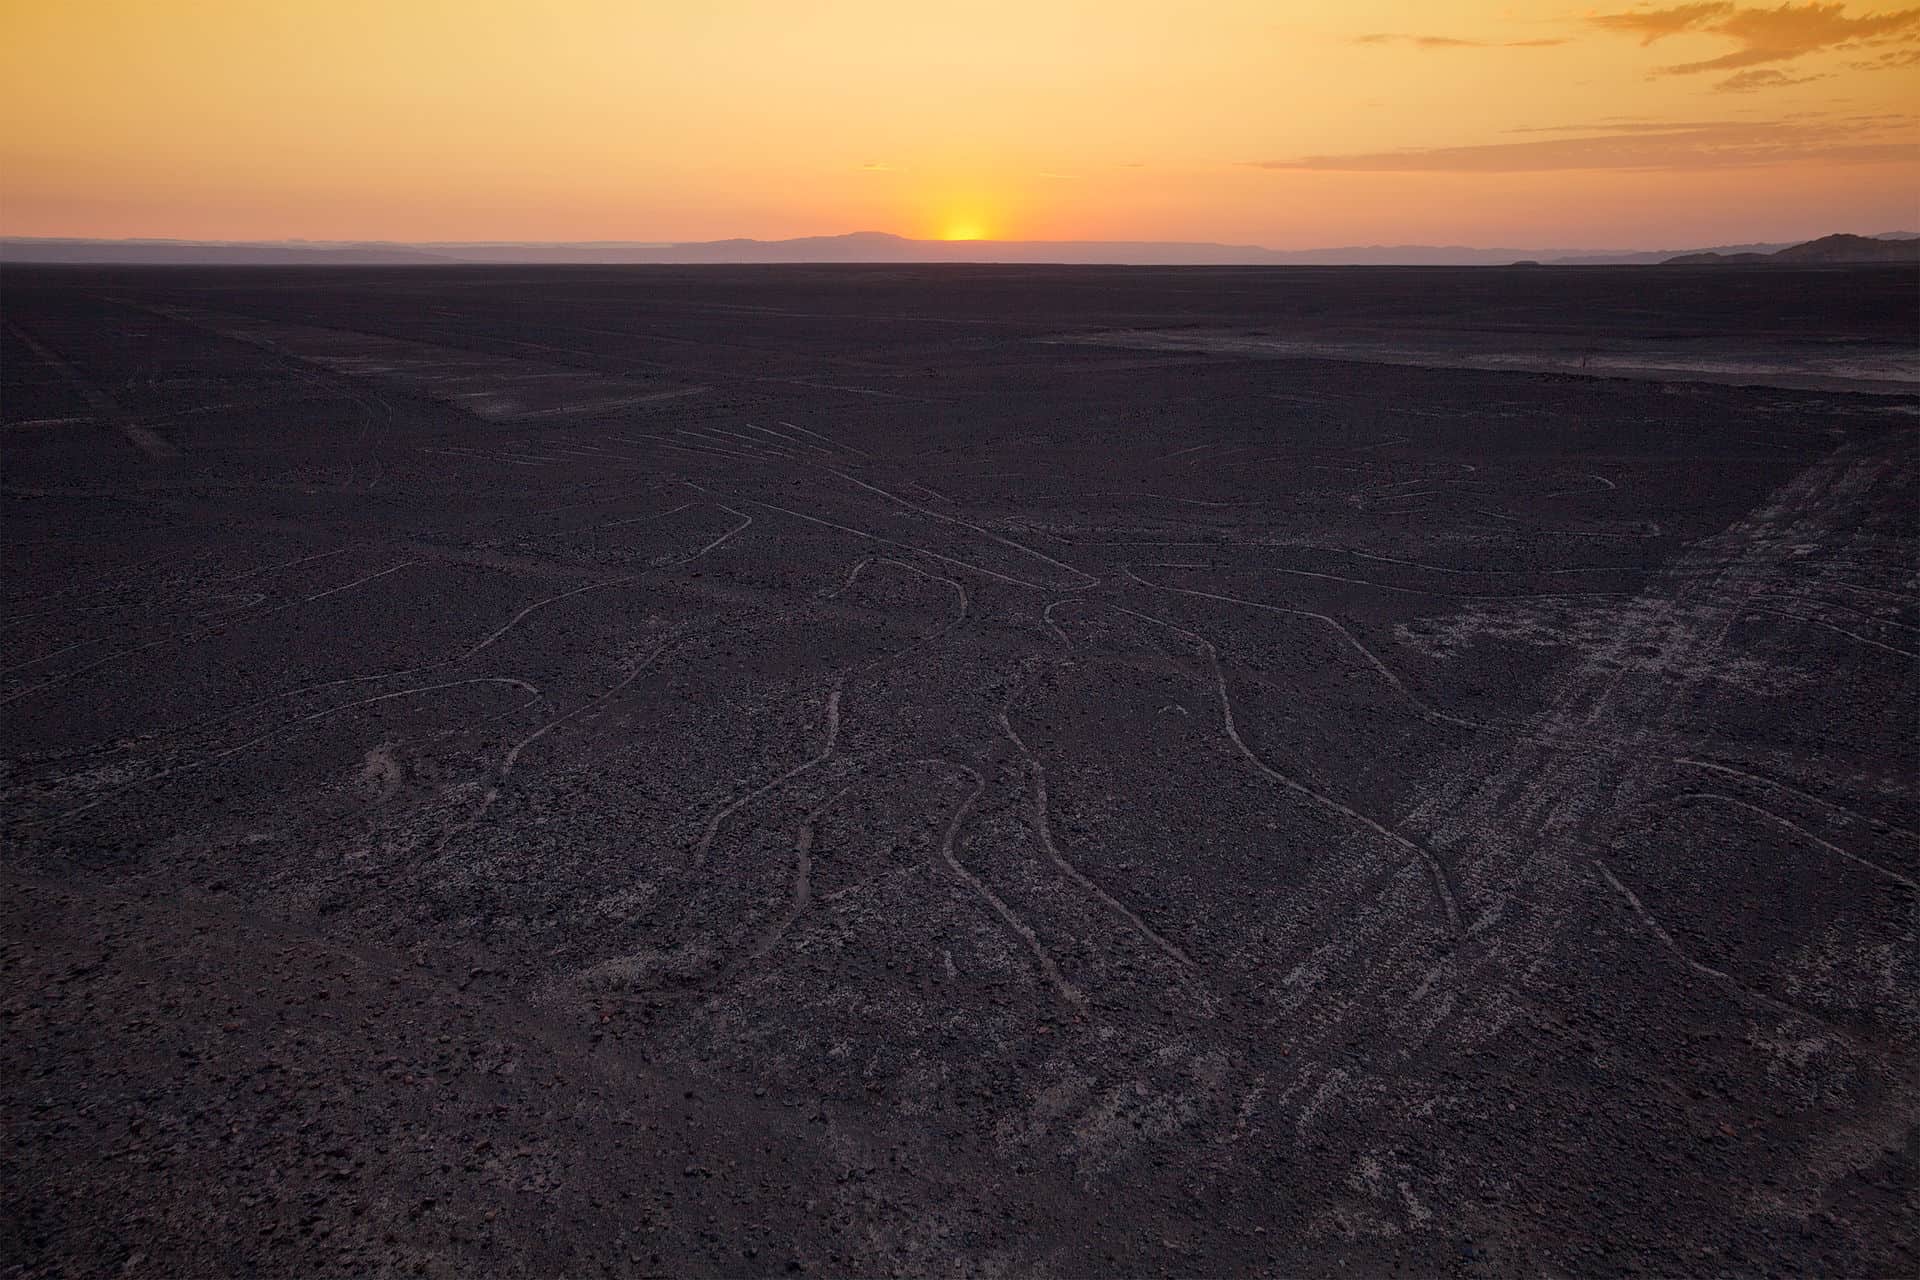 Nazca lines, tree (seen from the observation tower). Image Credit: Wikimedia Commons